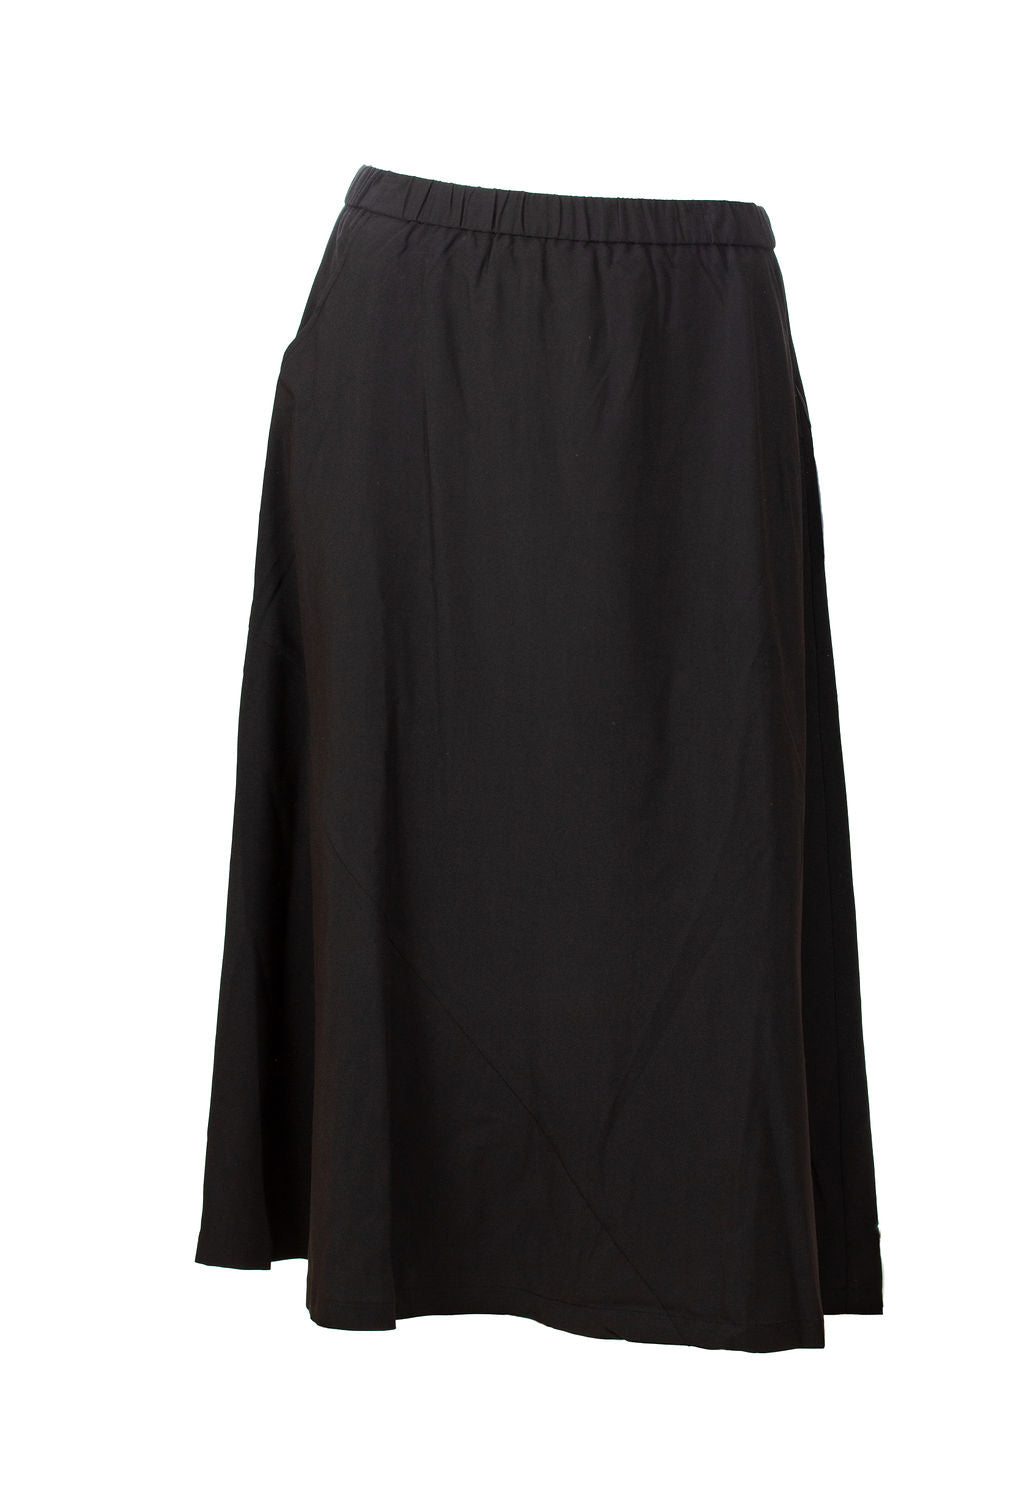 COTTON A-LINE SKIRT WITH POCKETS